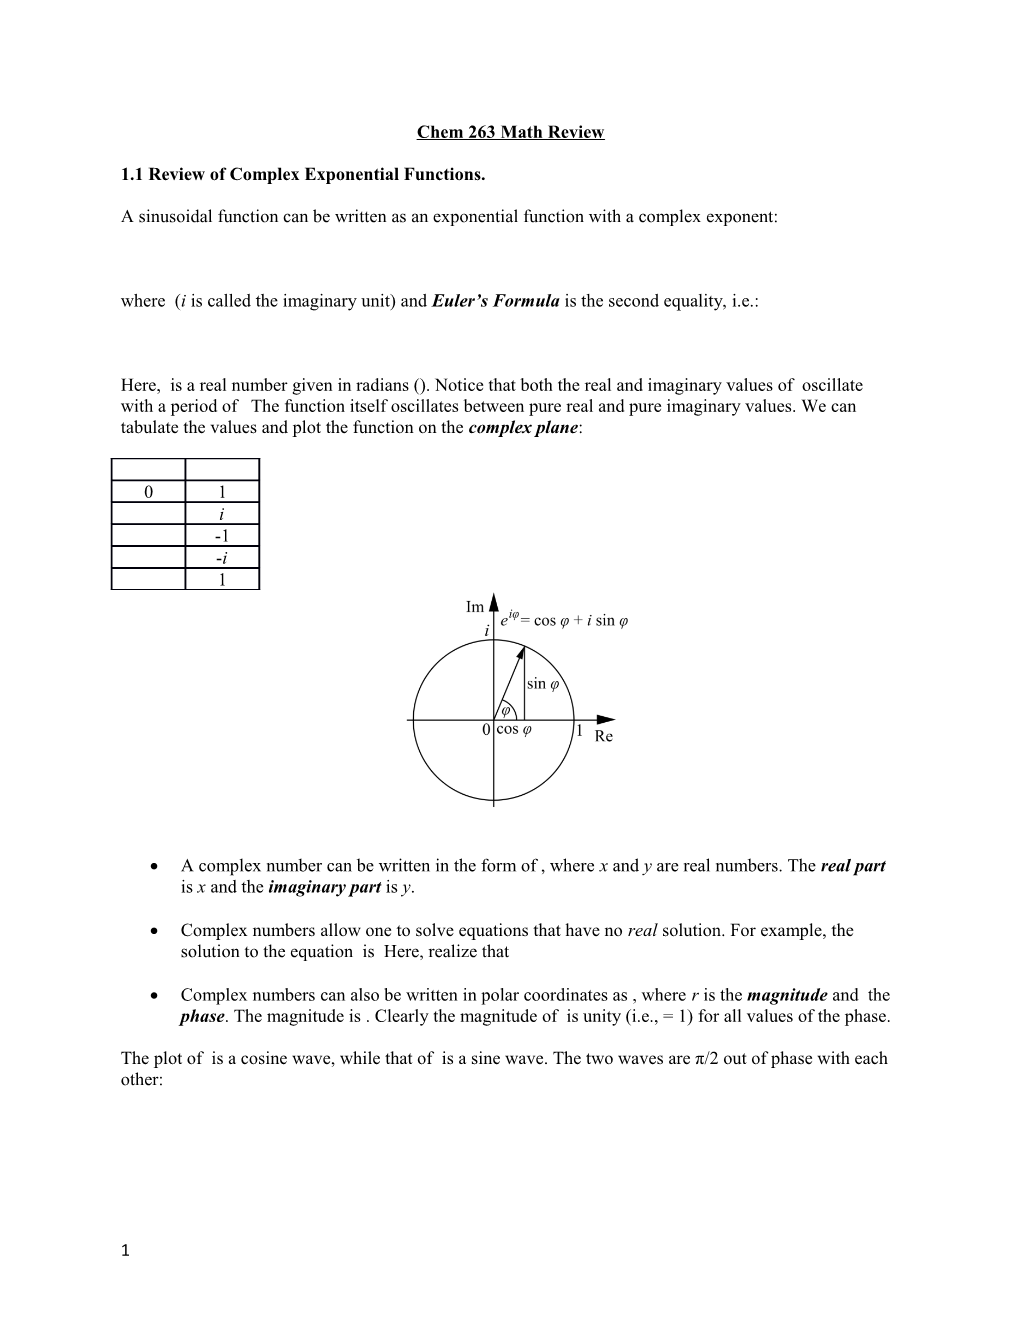 1.1 Review of Complex Exponential Functions